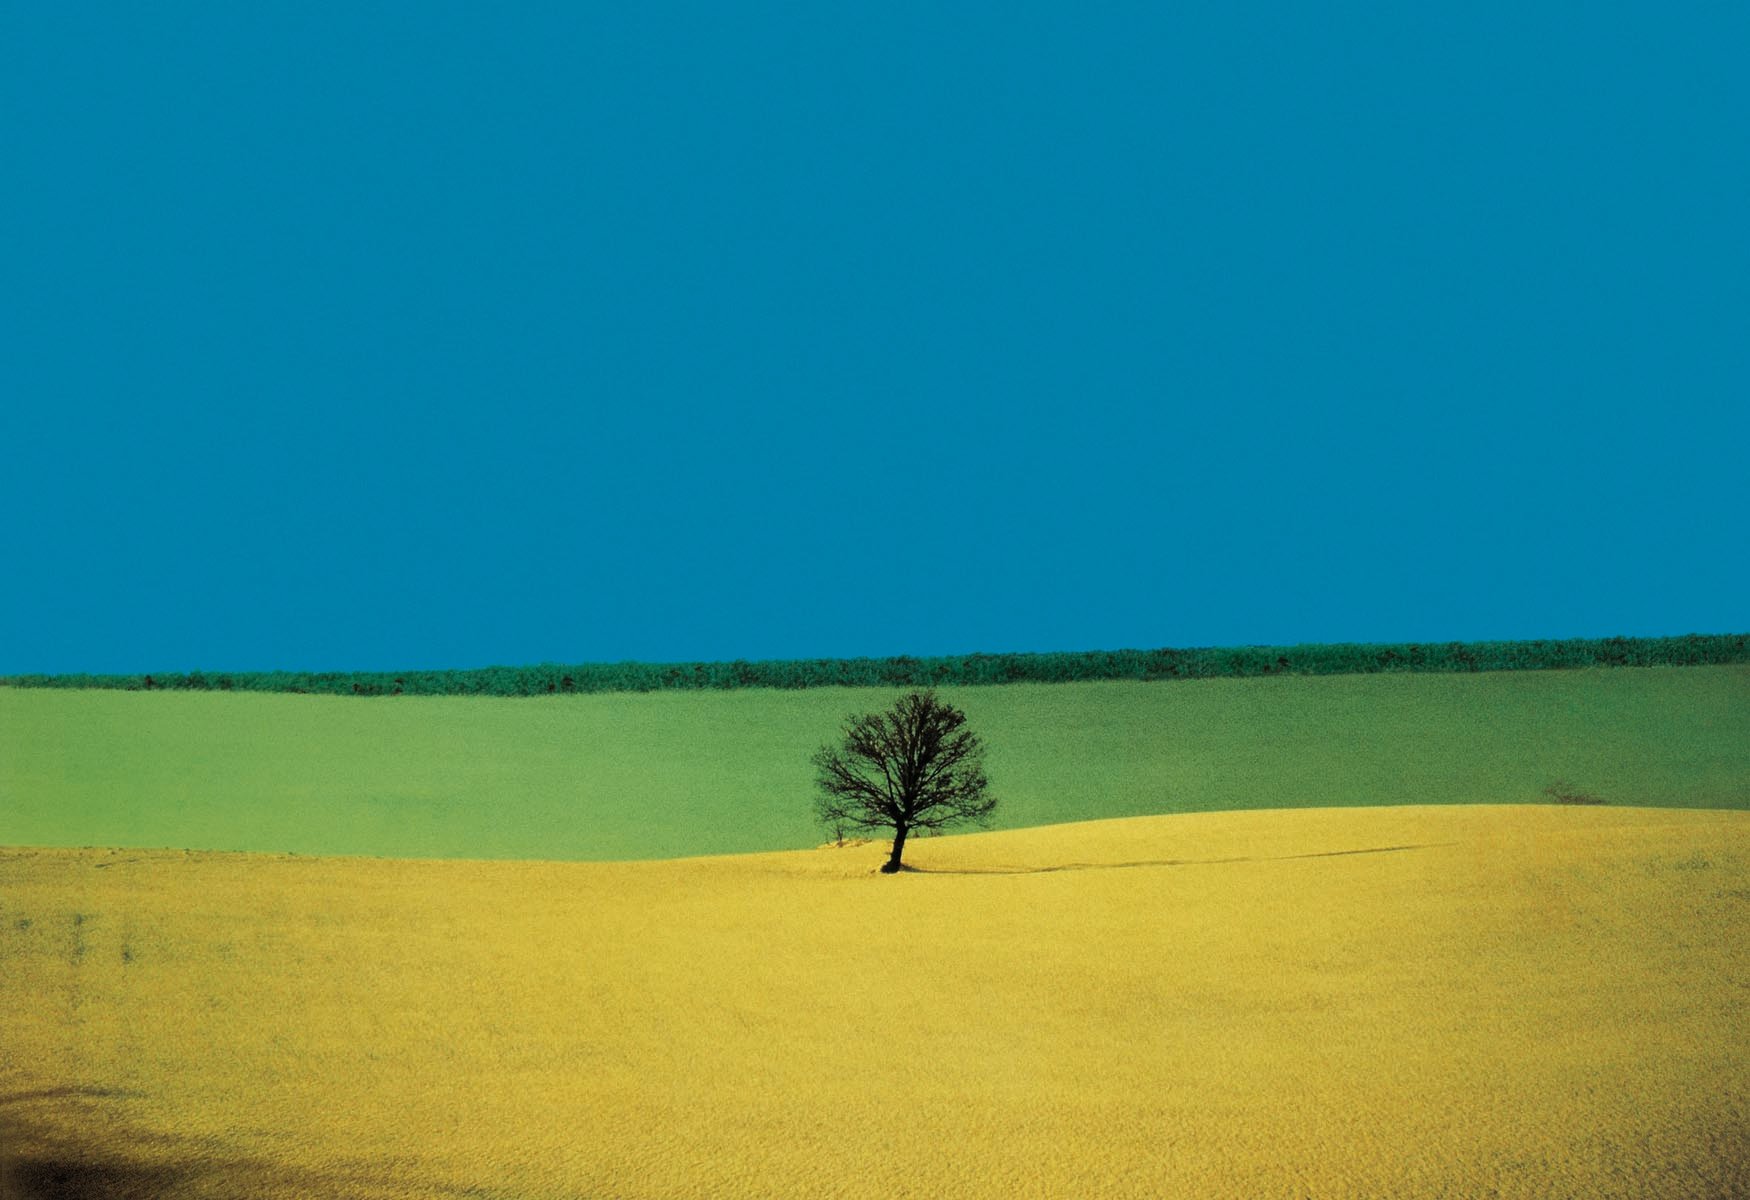 Calming blue sea landscape photo, on grey cover, Franco Fontana Behind the Invisible in white and black font to lower left